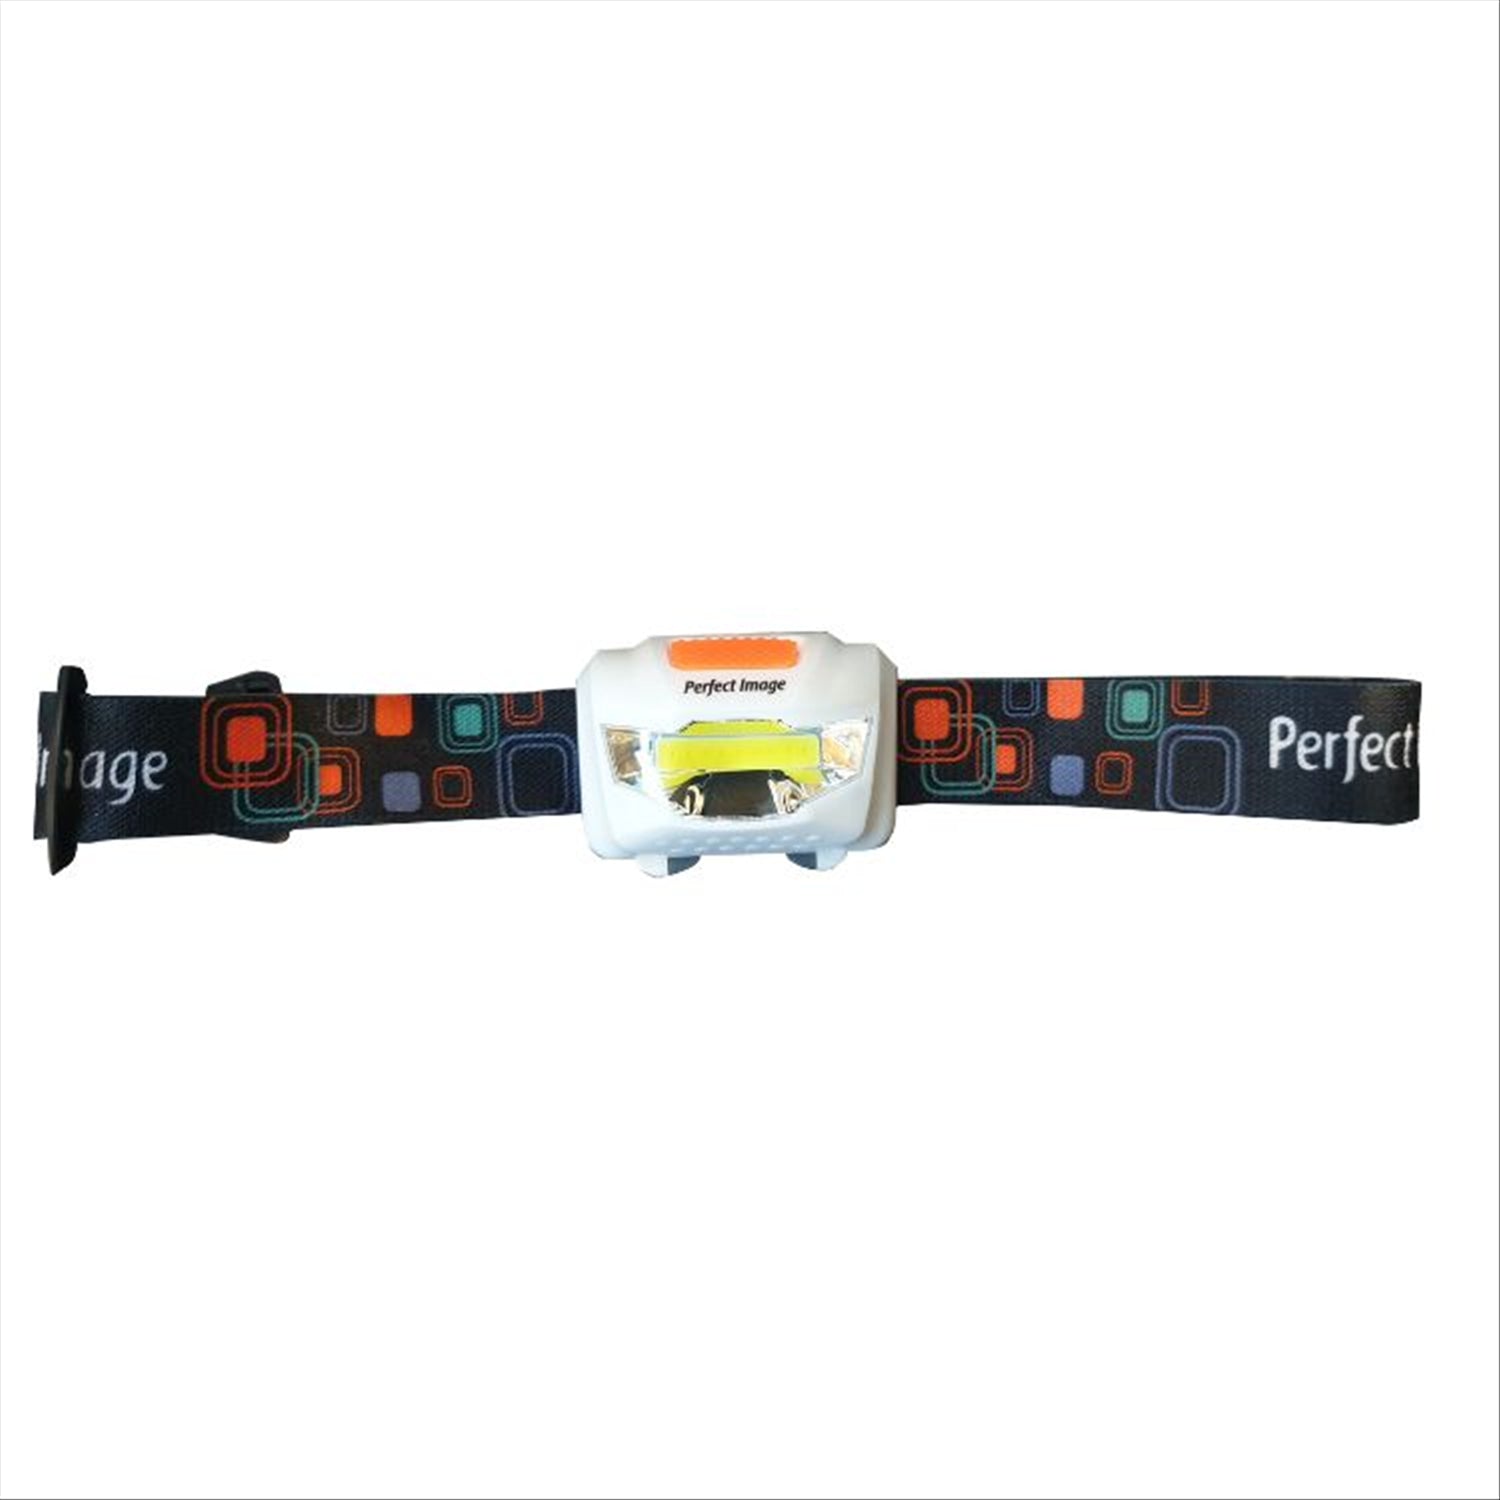 PERFECT IMAGE Perfect Image Headlamp 180 Lumens with Batteries